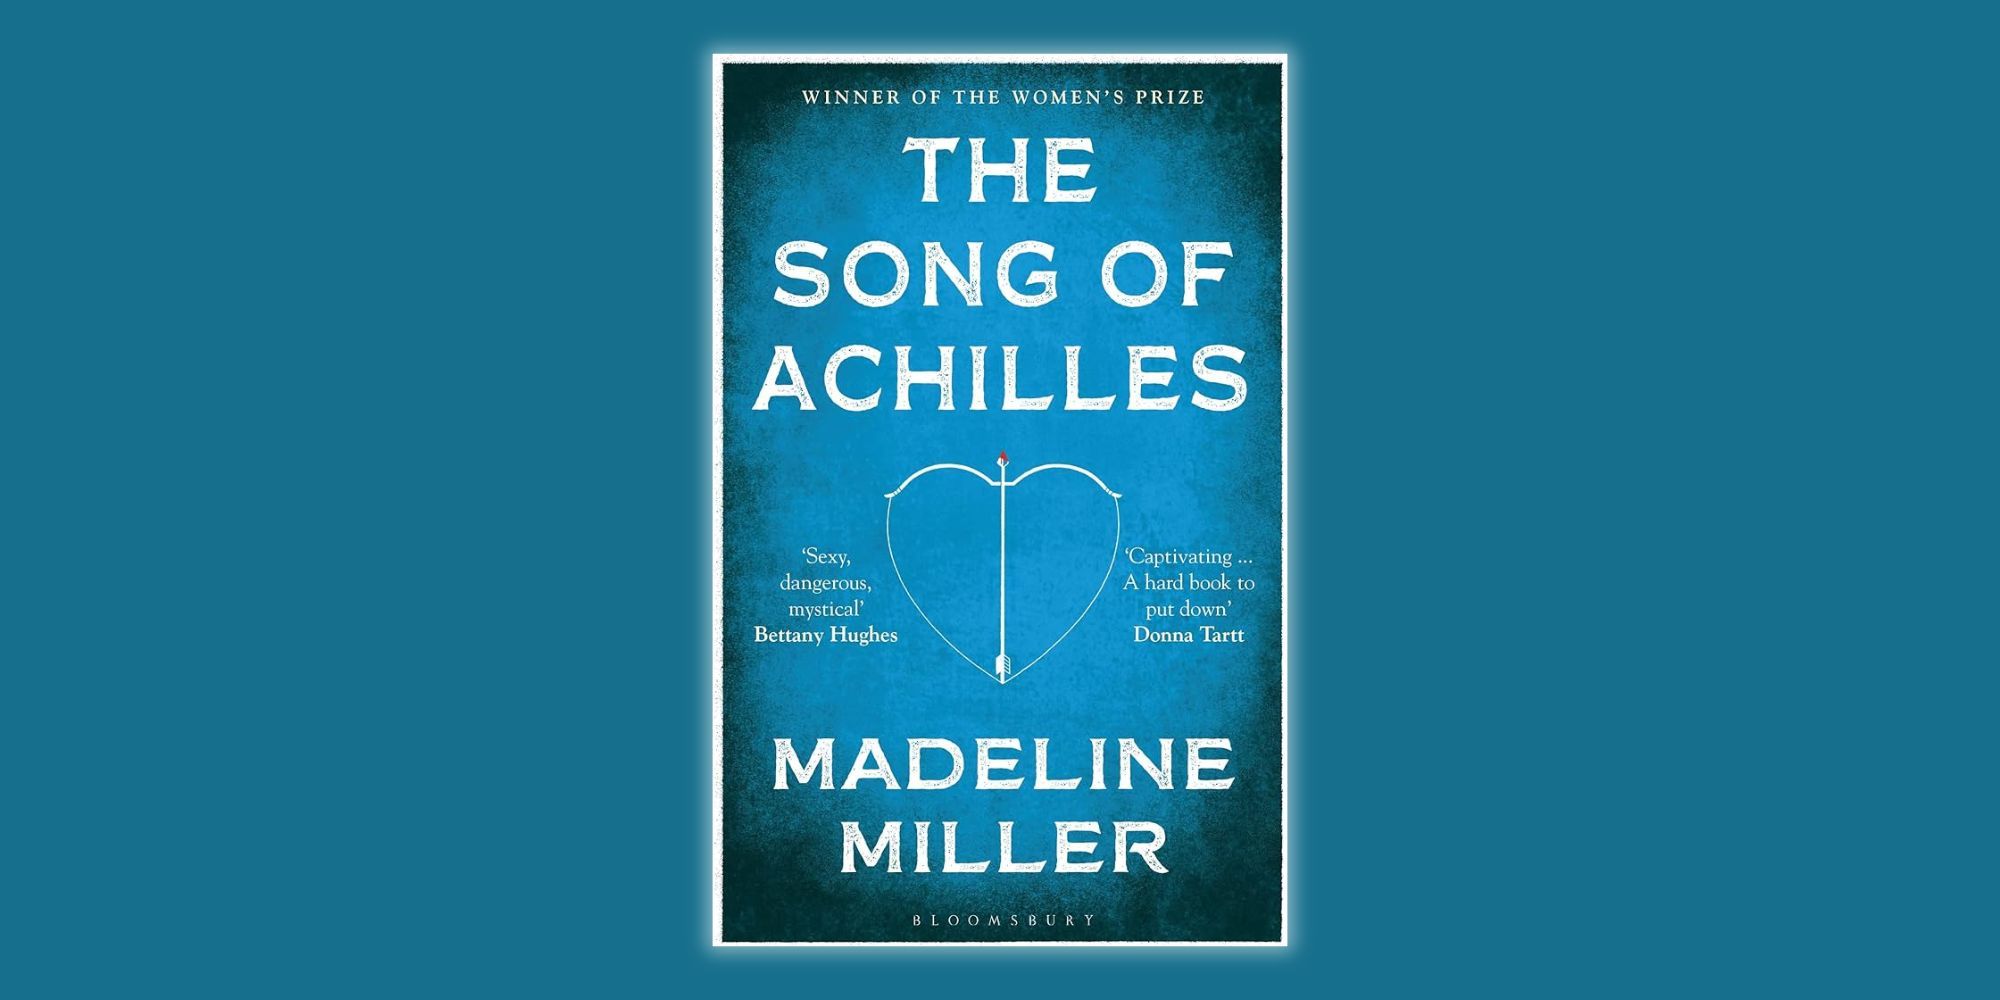 The Song of Achilles book cover